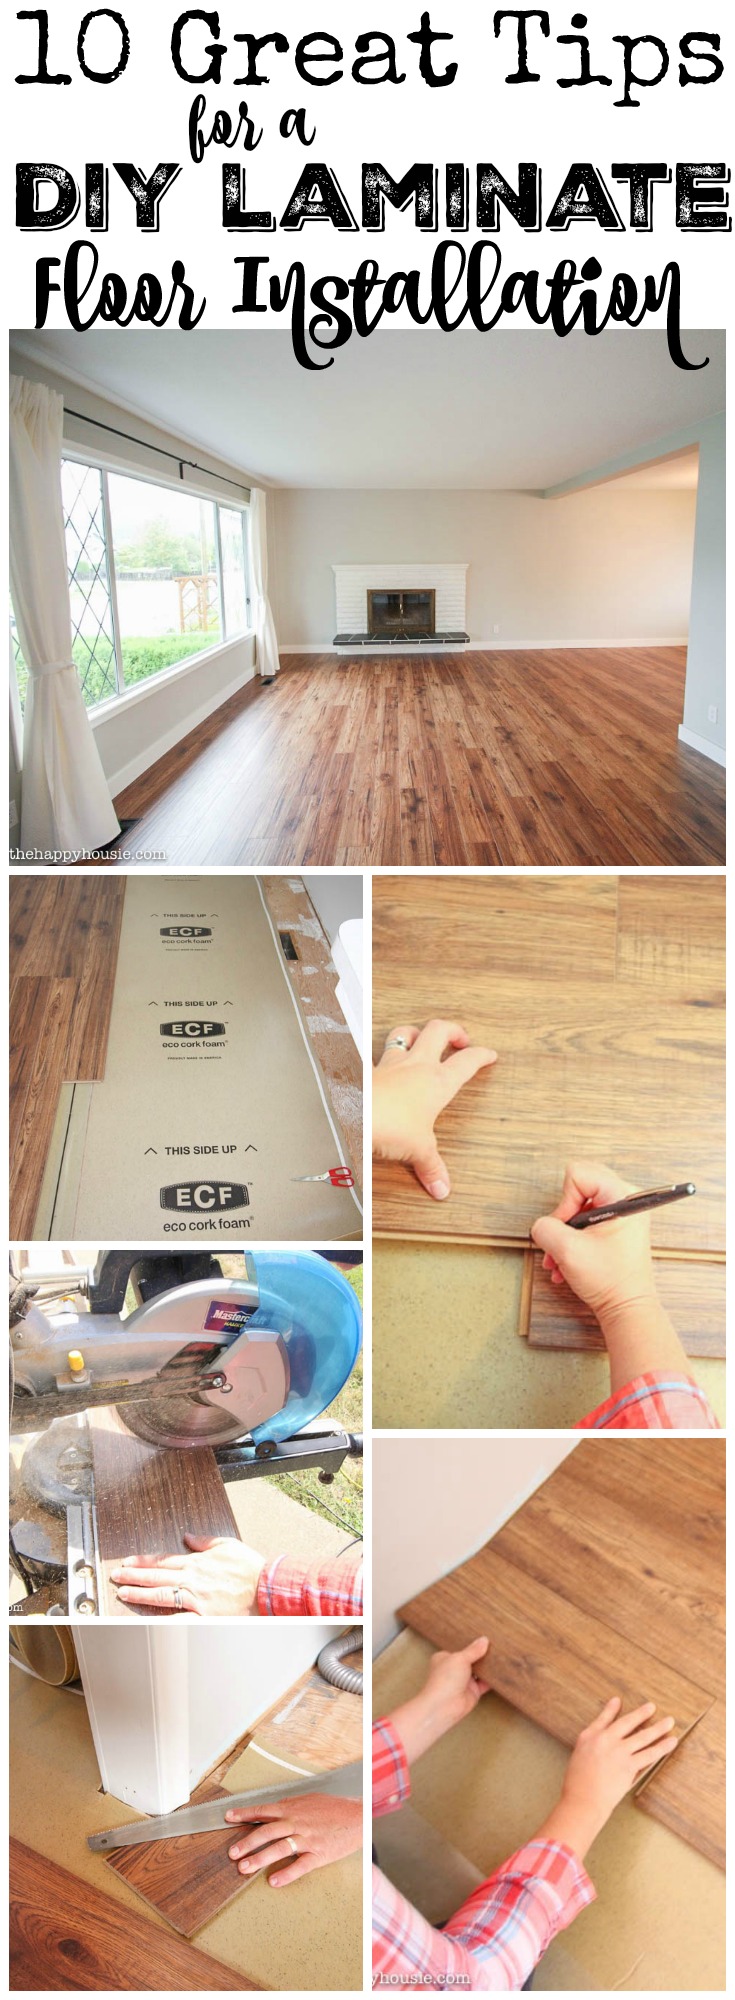 10 Great Tips for a DIY Laminate Floor Installation at thehappyhousie.com